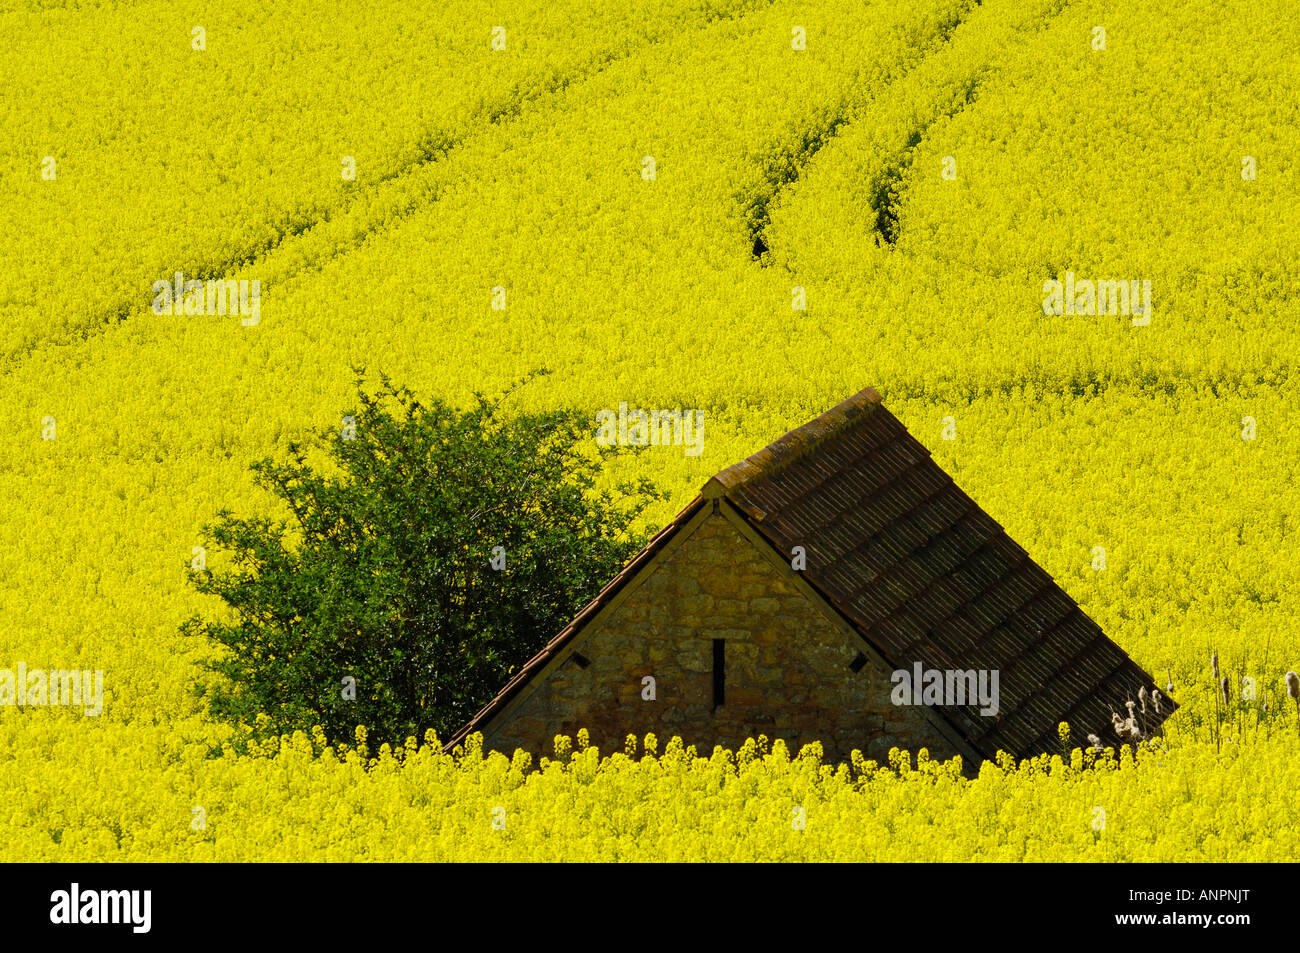 An abandoned farm building stands in a field surrounded by rapeseed in flower. Wrington, North Somerset, England Stock Photo